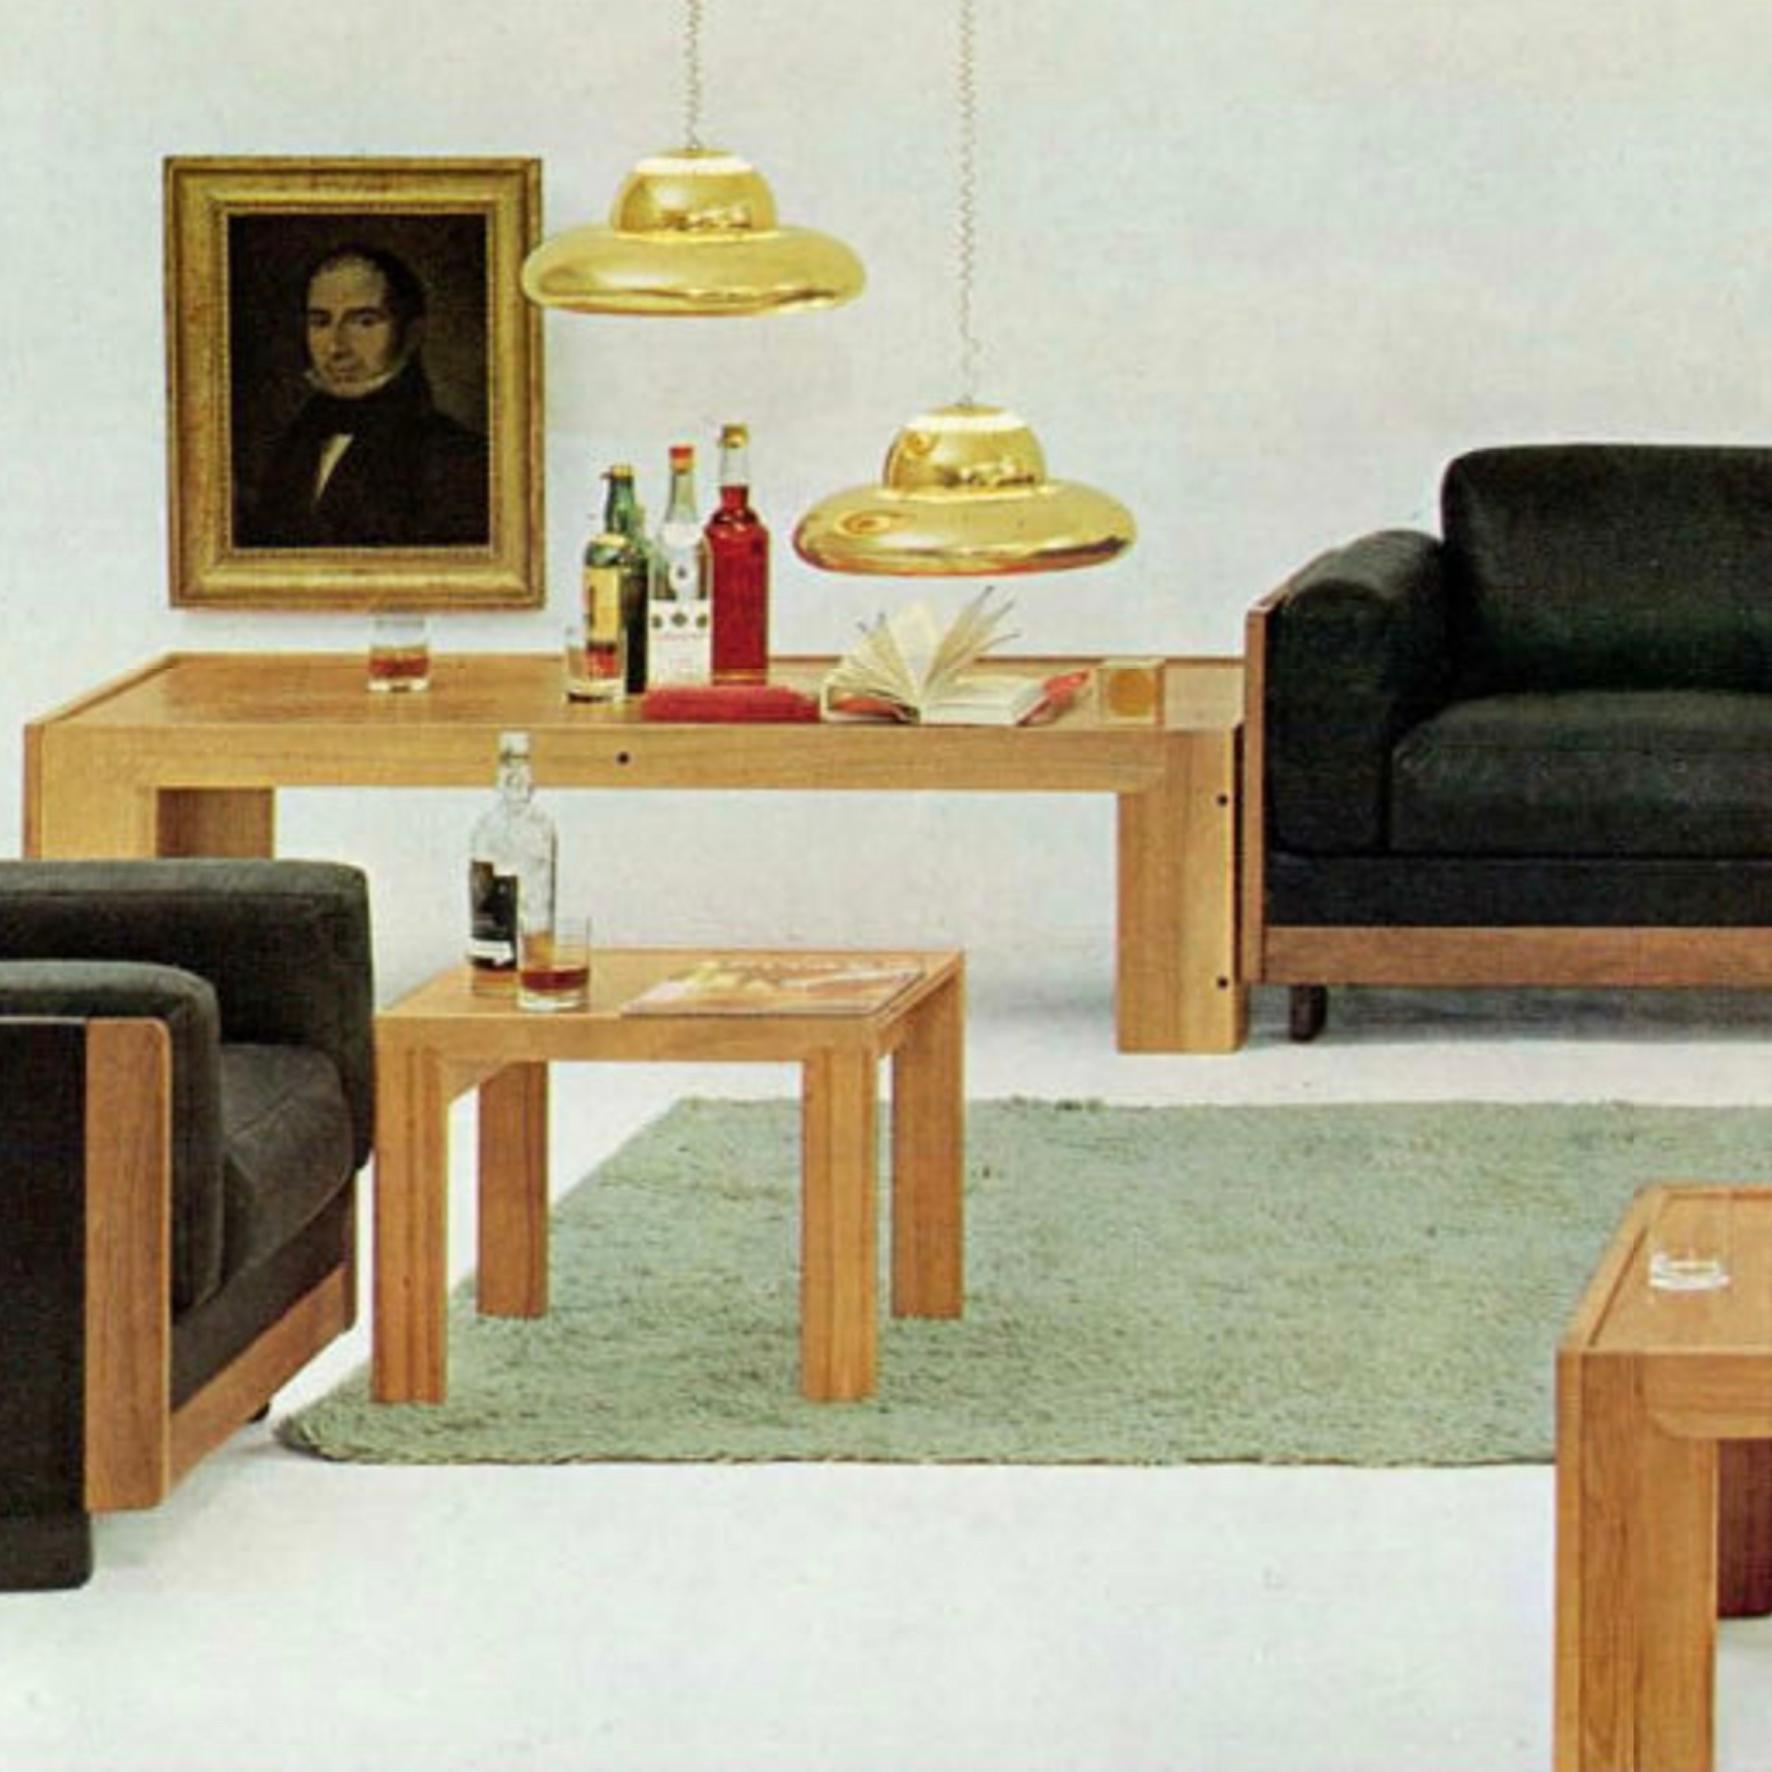 Afra & Tobia Scarpa, A Low Table, Model 771, Cassina, 1960s 2